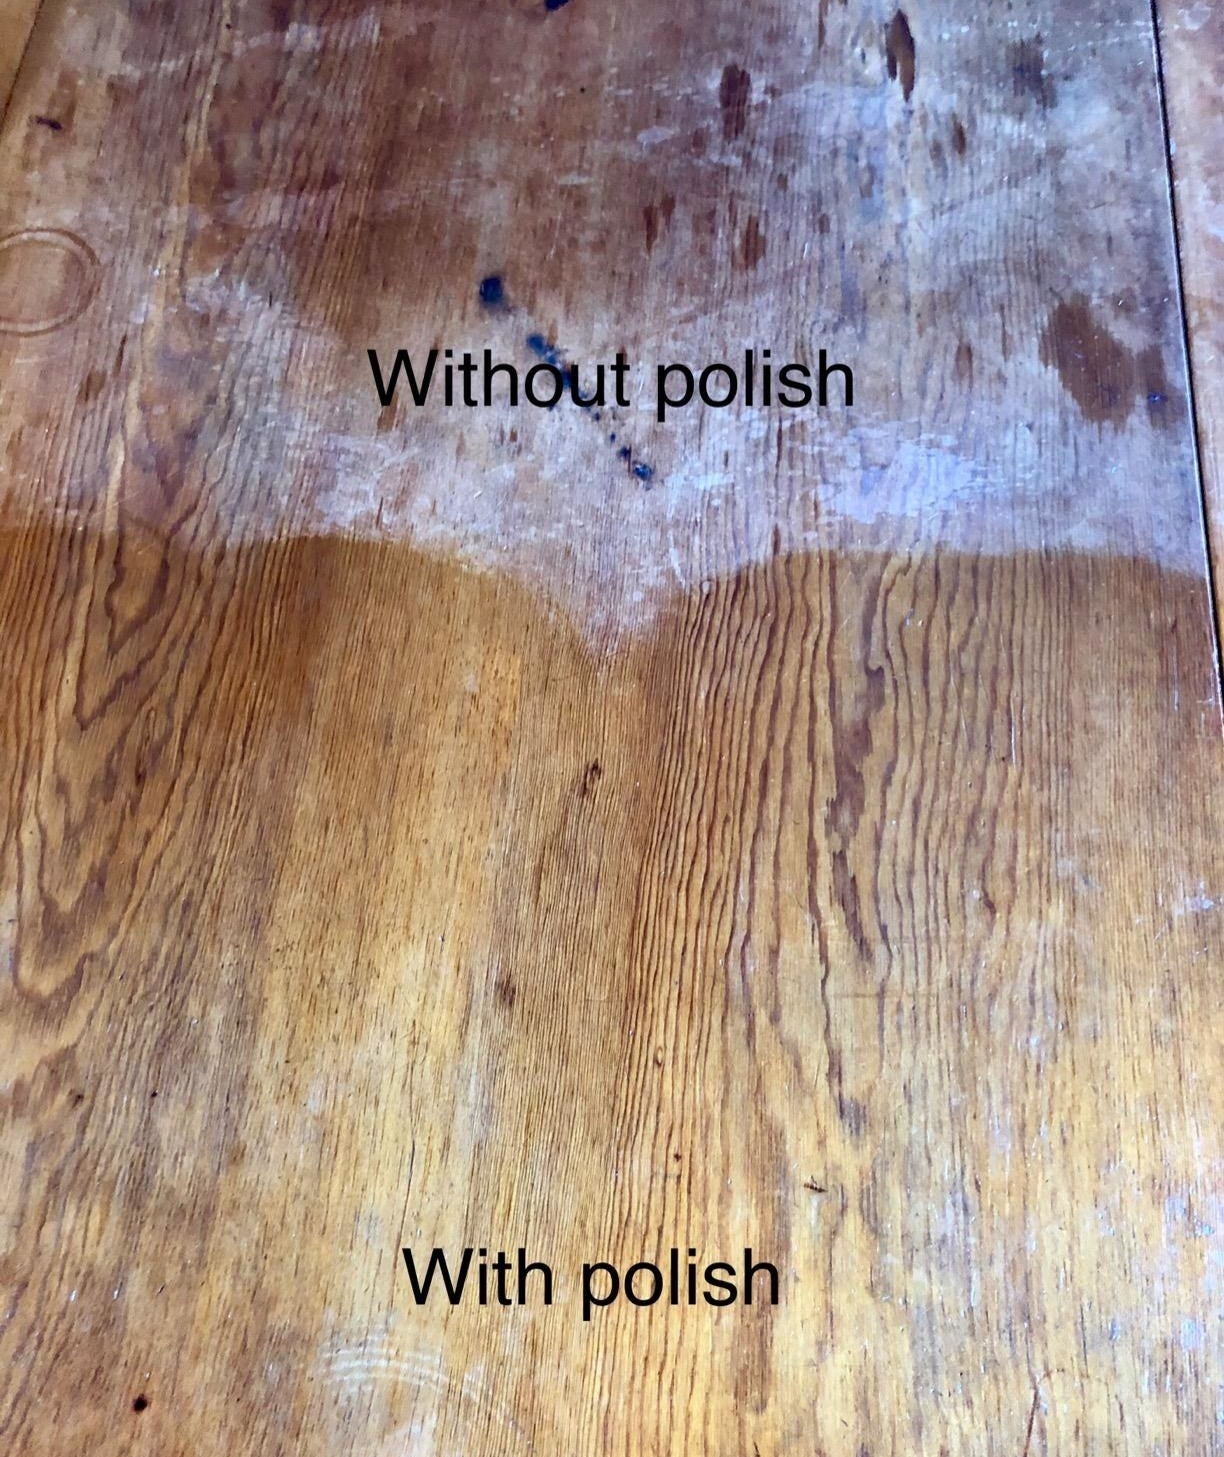 Reviewer image of stained wood without use of polish and clean wood with use of polish